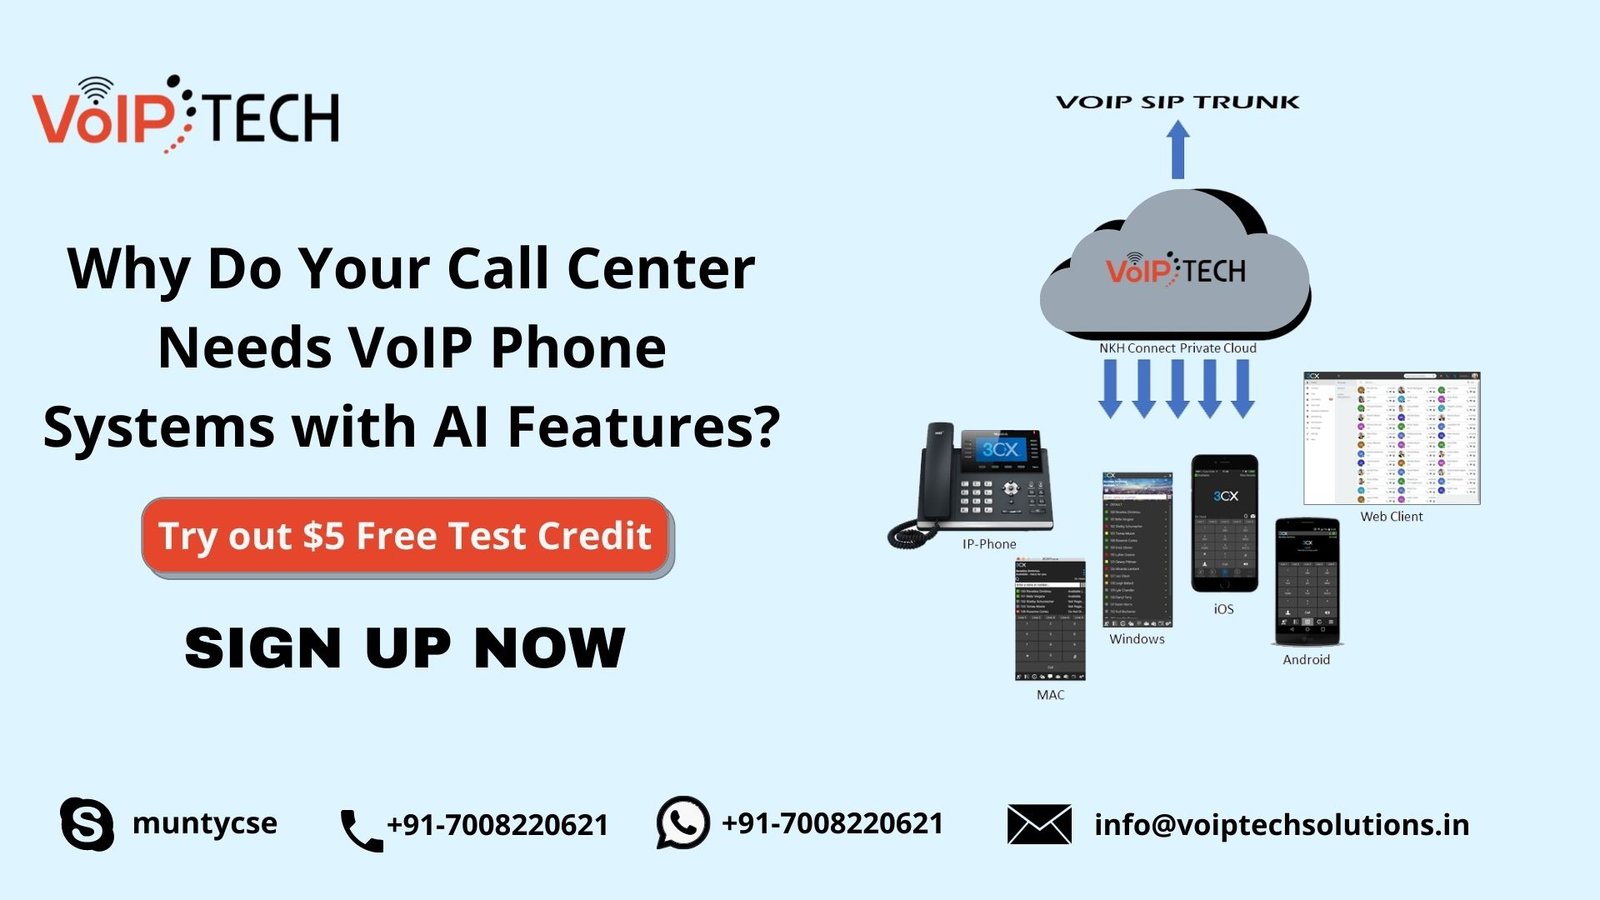 VoIP Phone Systems, Why Do Your Call Center Needs VoIP Phone Systems with AI Features?, VoIP tech solutions, vici dialer, virtual number, Voip Providers, voip services in india, best sip provider, business voip providers, VoIP Phone Numbers, voip minutes provider, top voip providers, voip minutes, International VoIP Provider